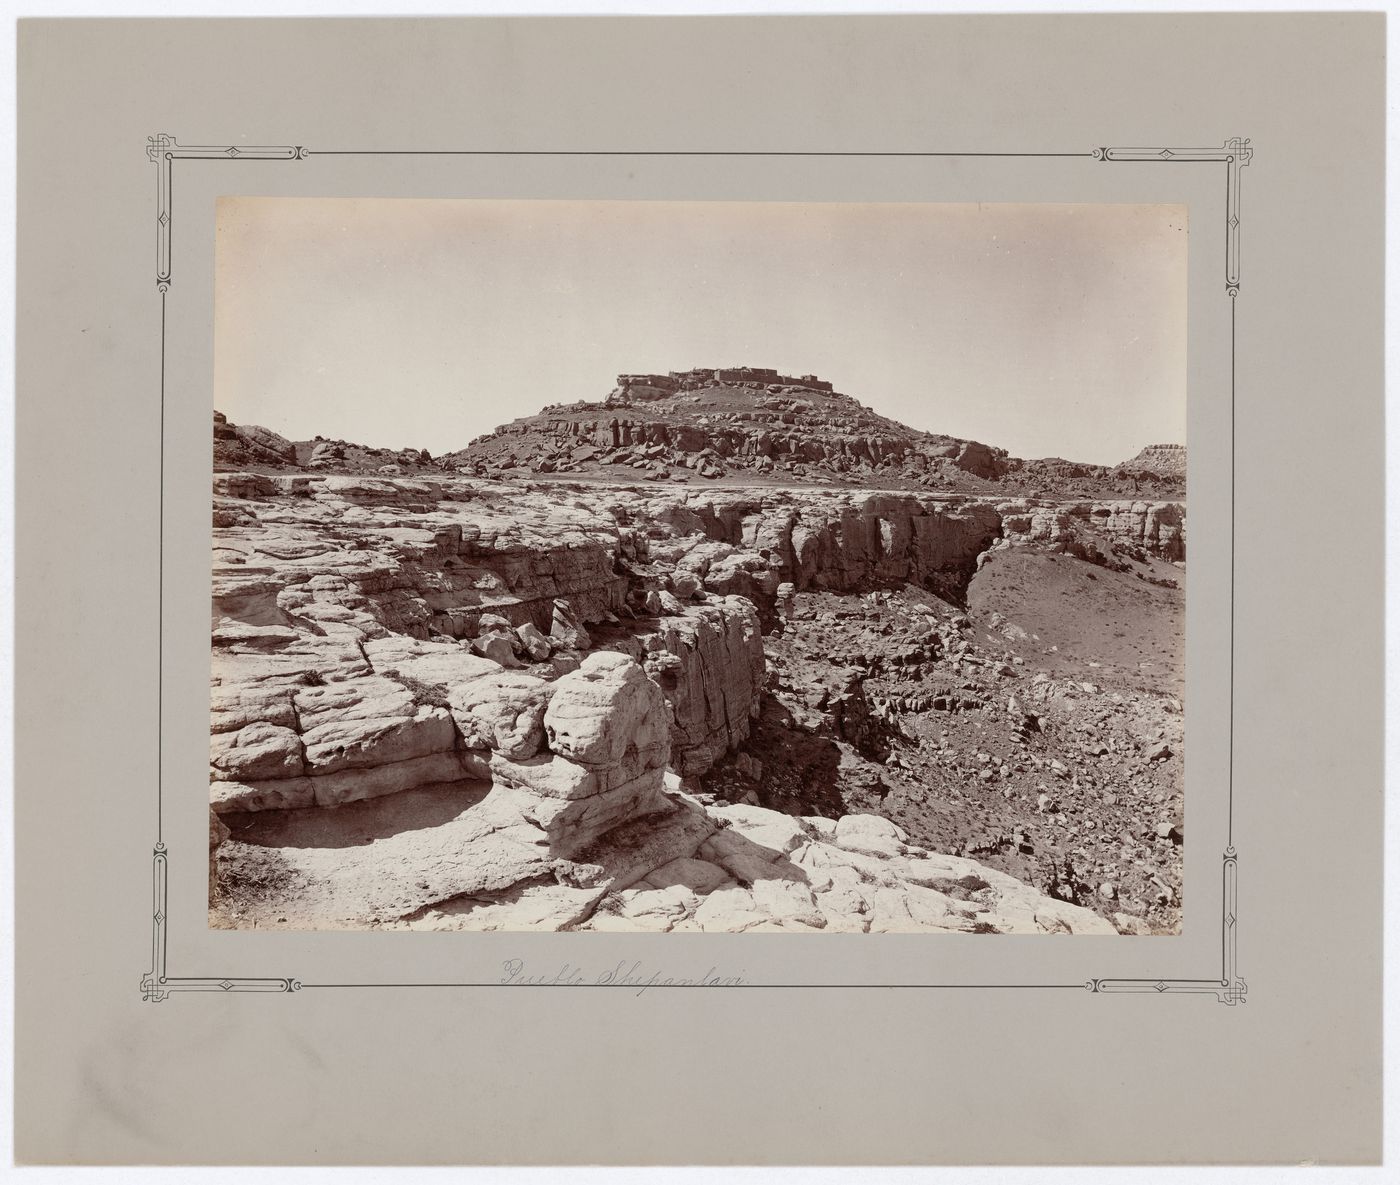 Distant view of Shipaulavi (now Sipaulovi) on the Second Mesa from below, Hopi Reservation, Arizona, United States